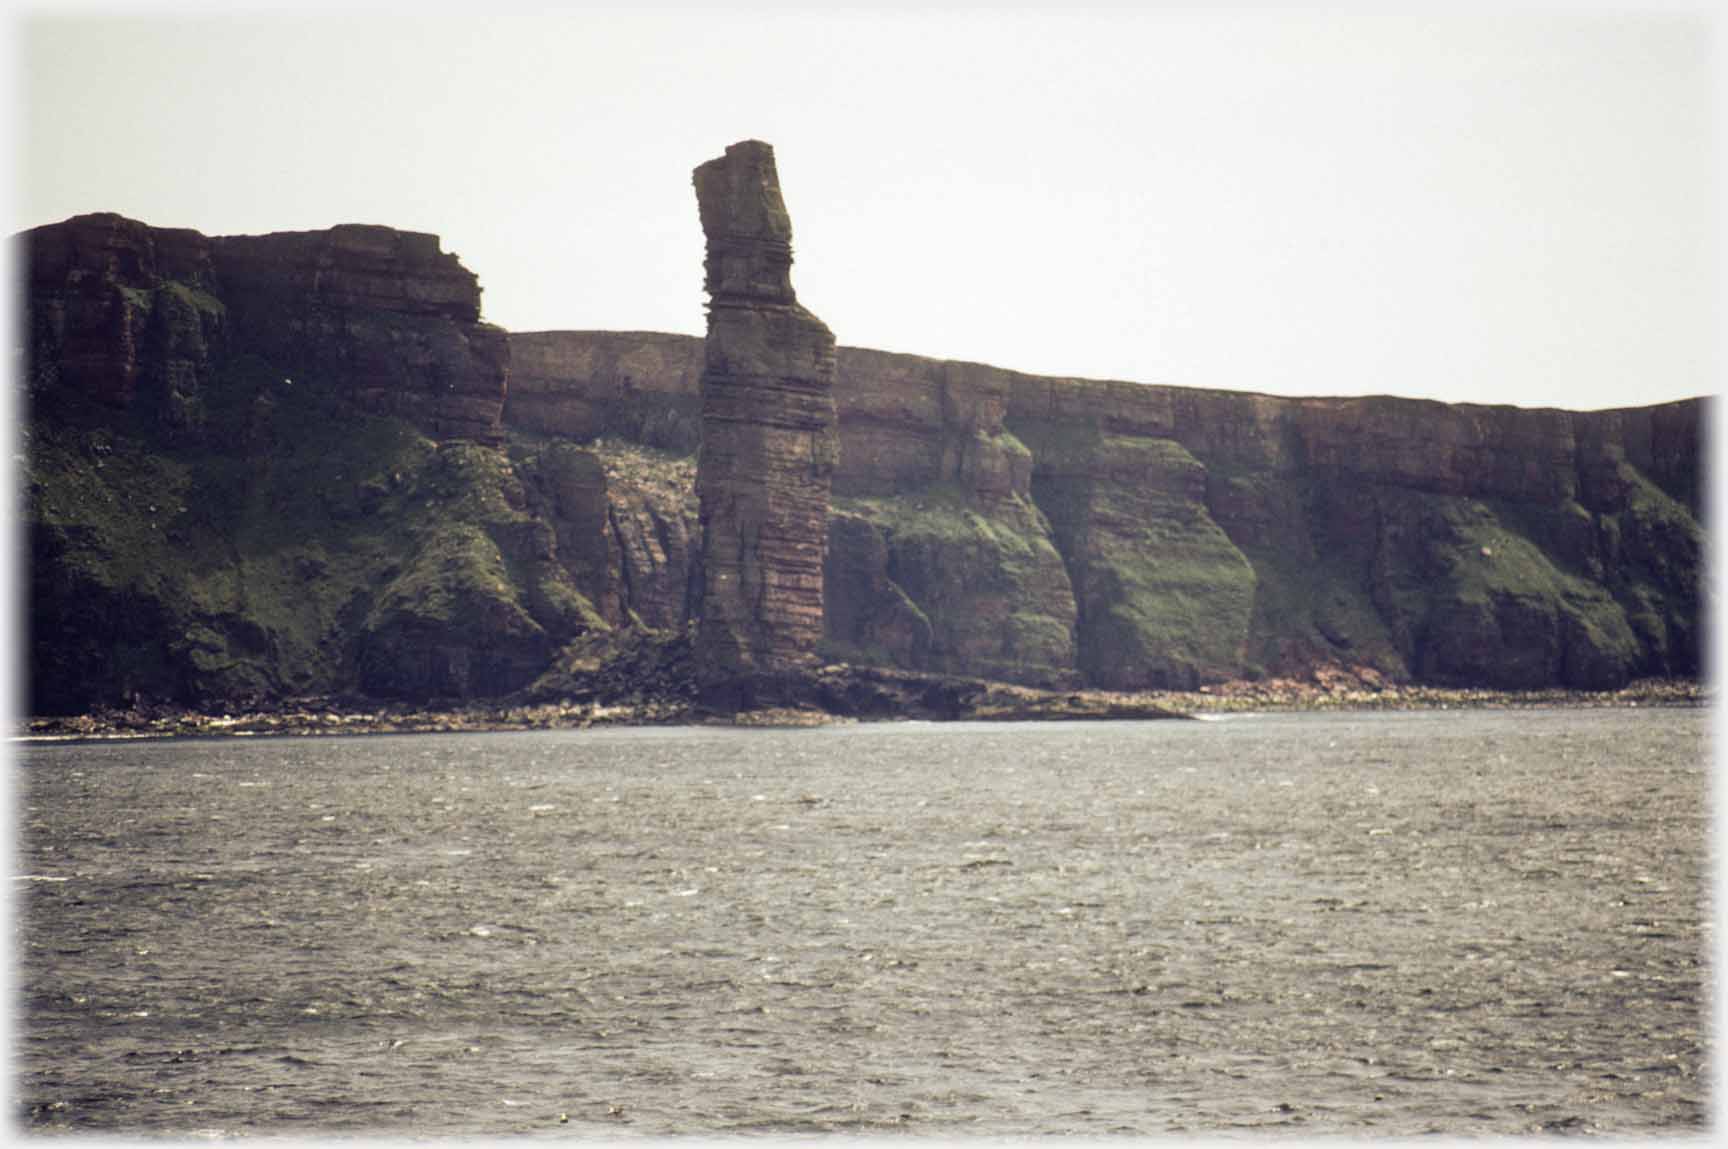 The Old Man of Hoy from nearby.